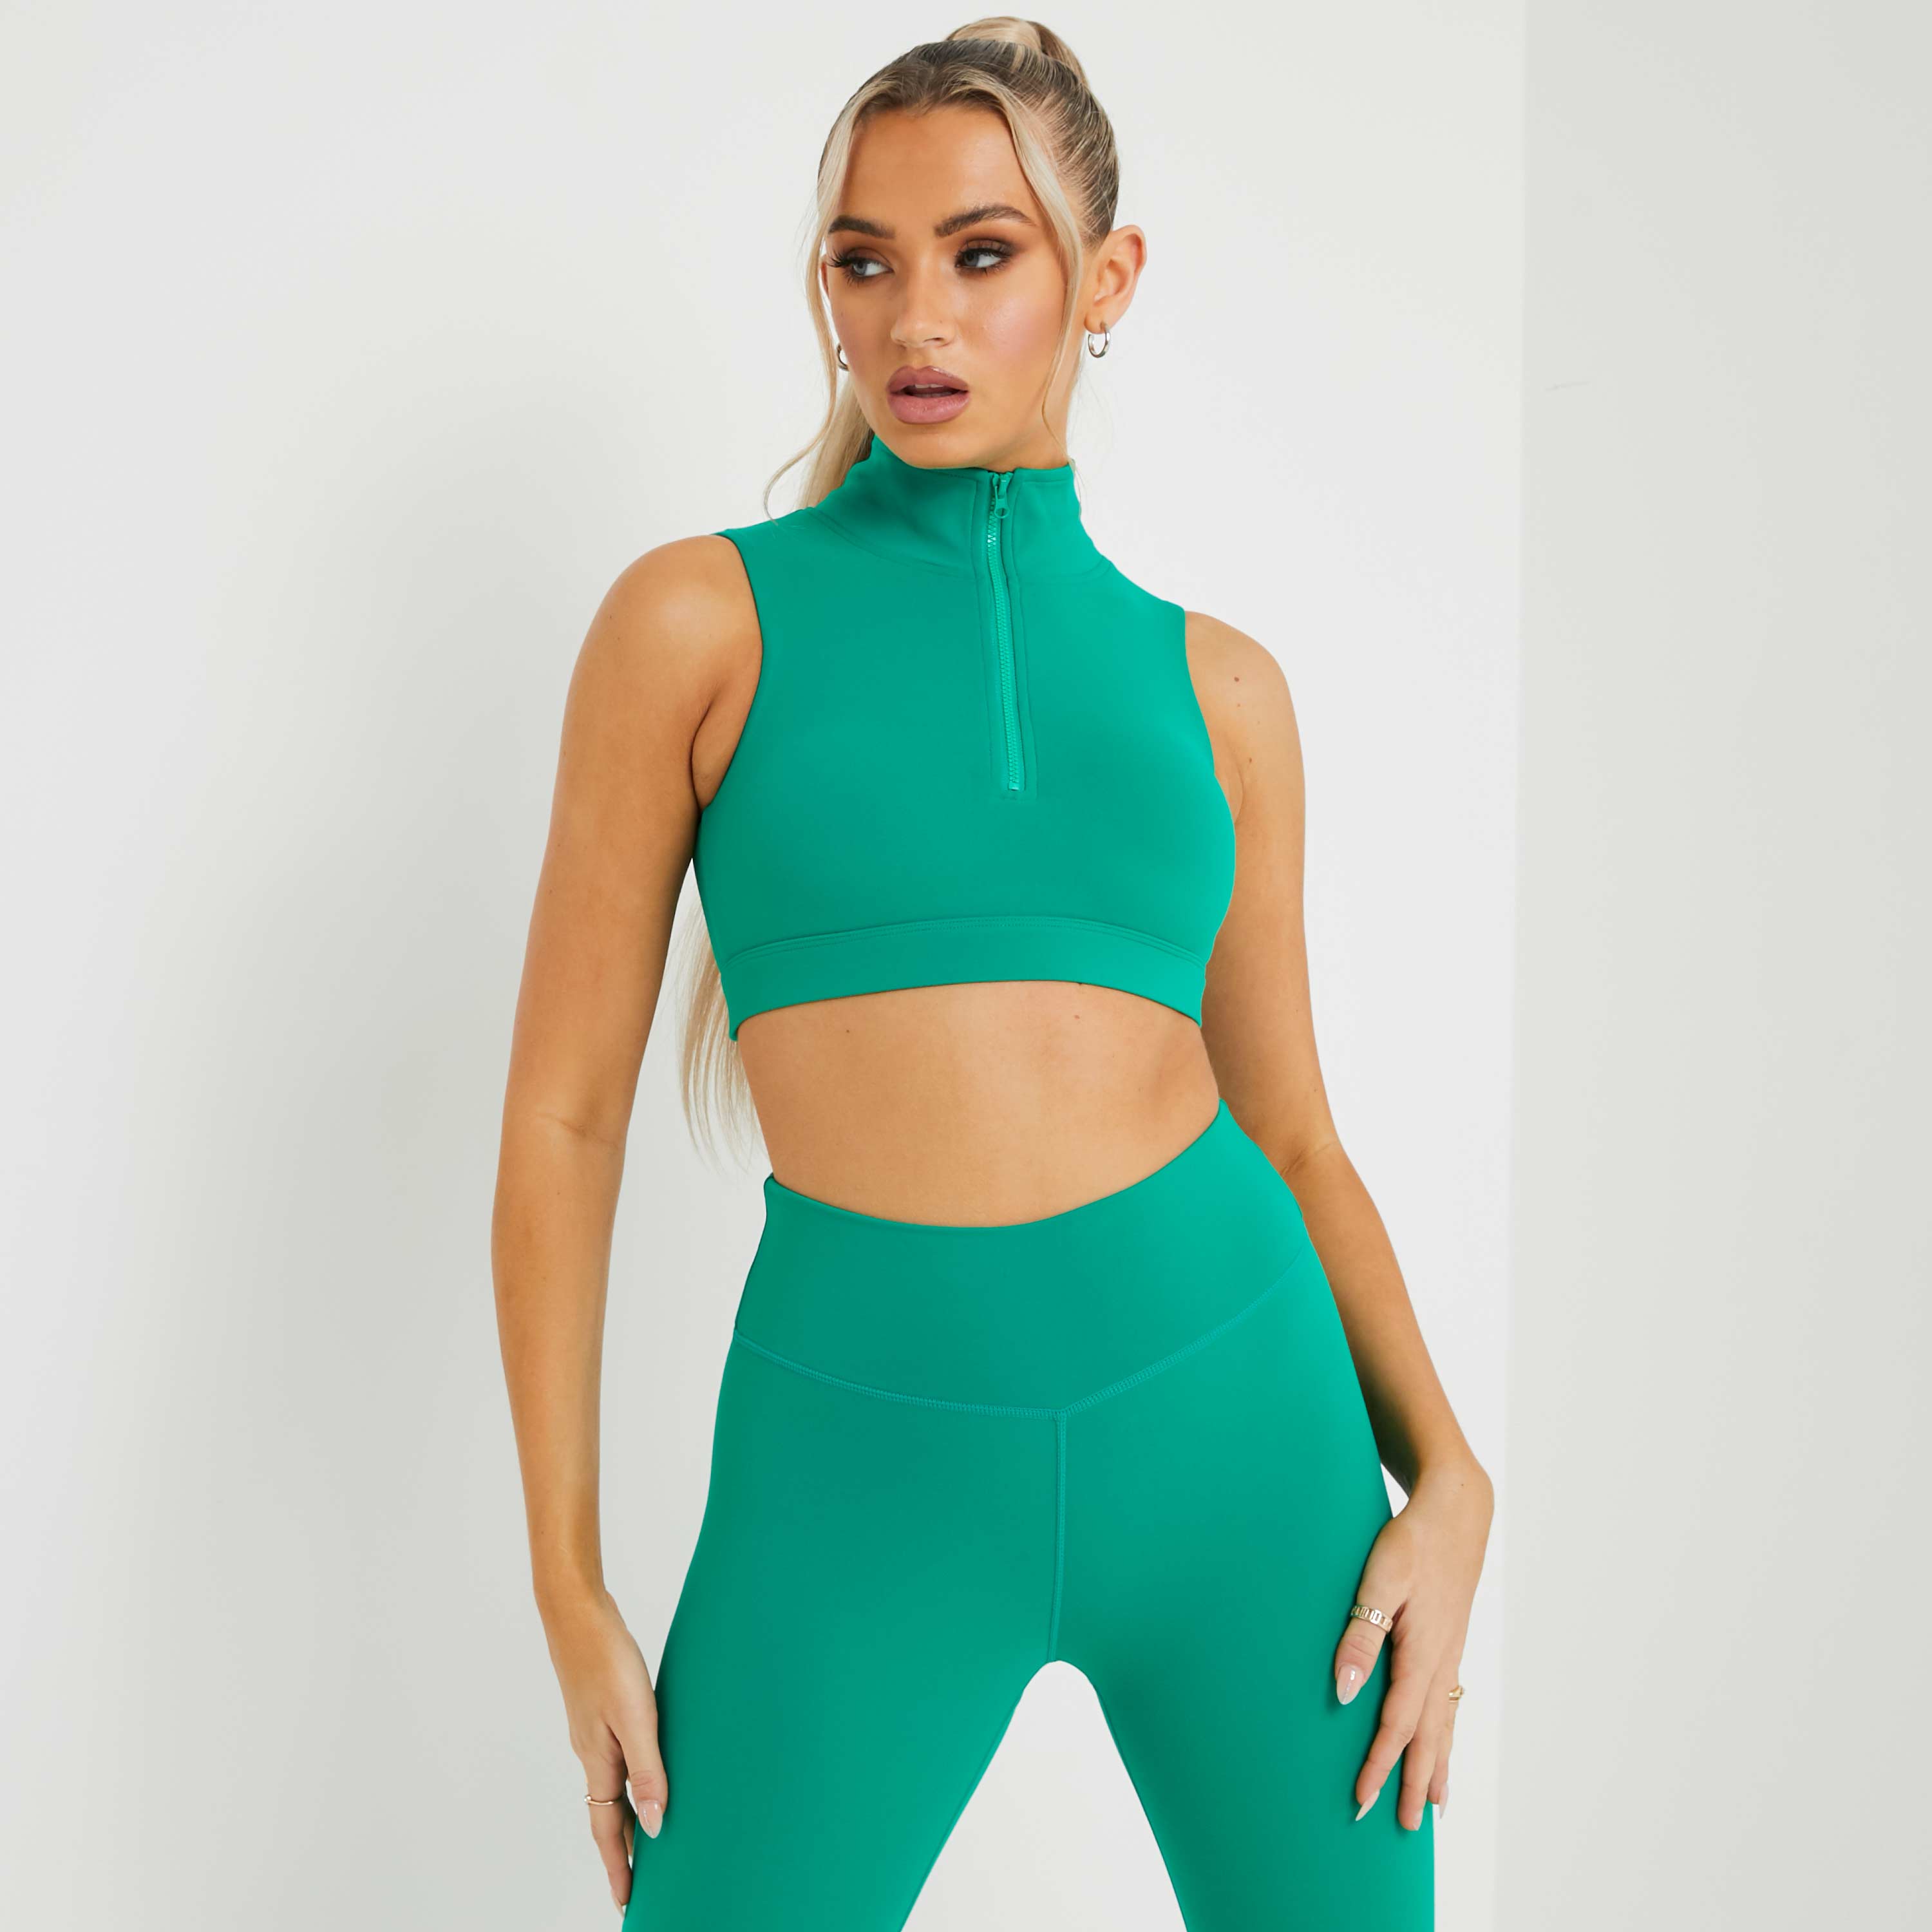 High Neck Zip Up Sleeveless Cropped Gym Top In Green UK Small S, Green